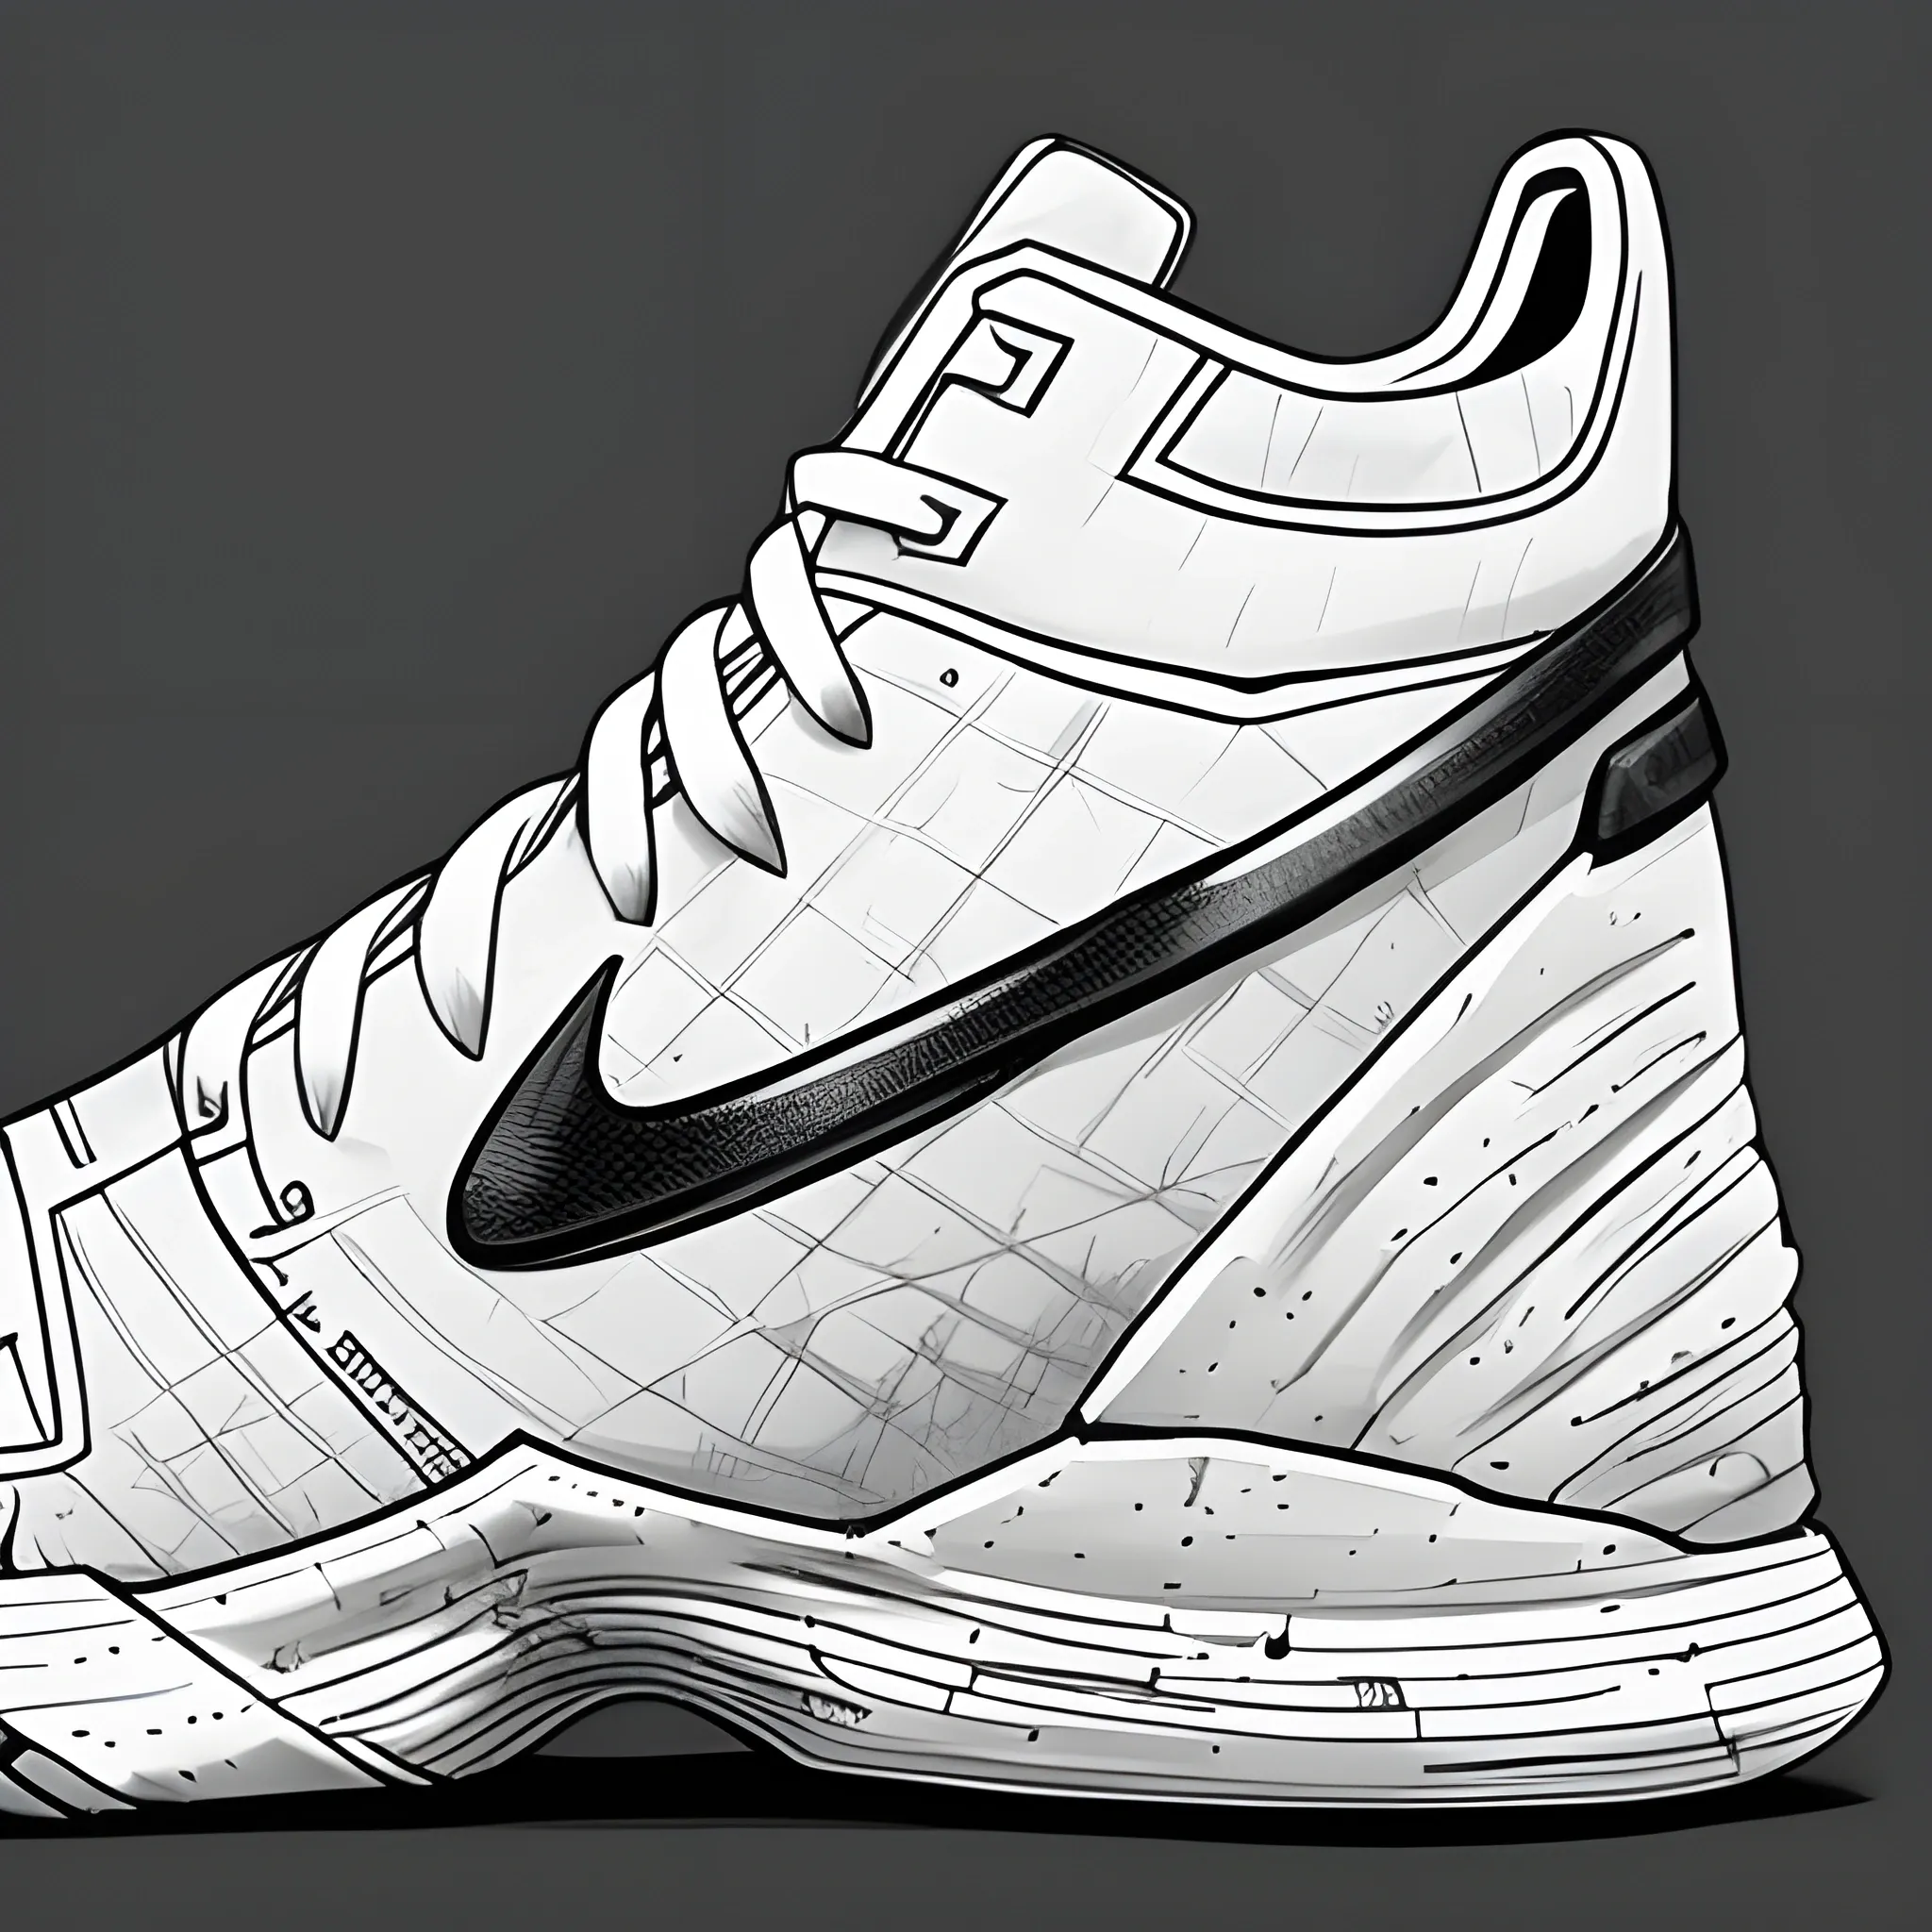 Concept Moon Knight basketball sneakers, popular in art station, mid-top, bloated, smooth, sharp focus
